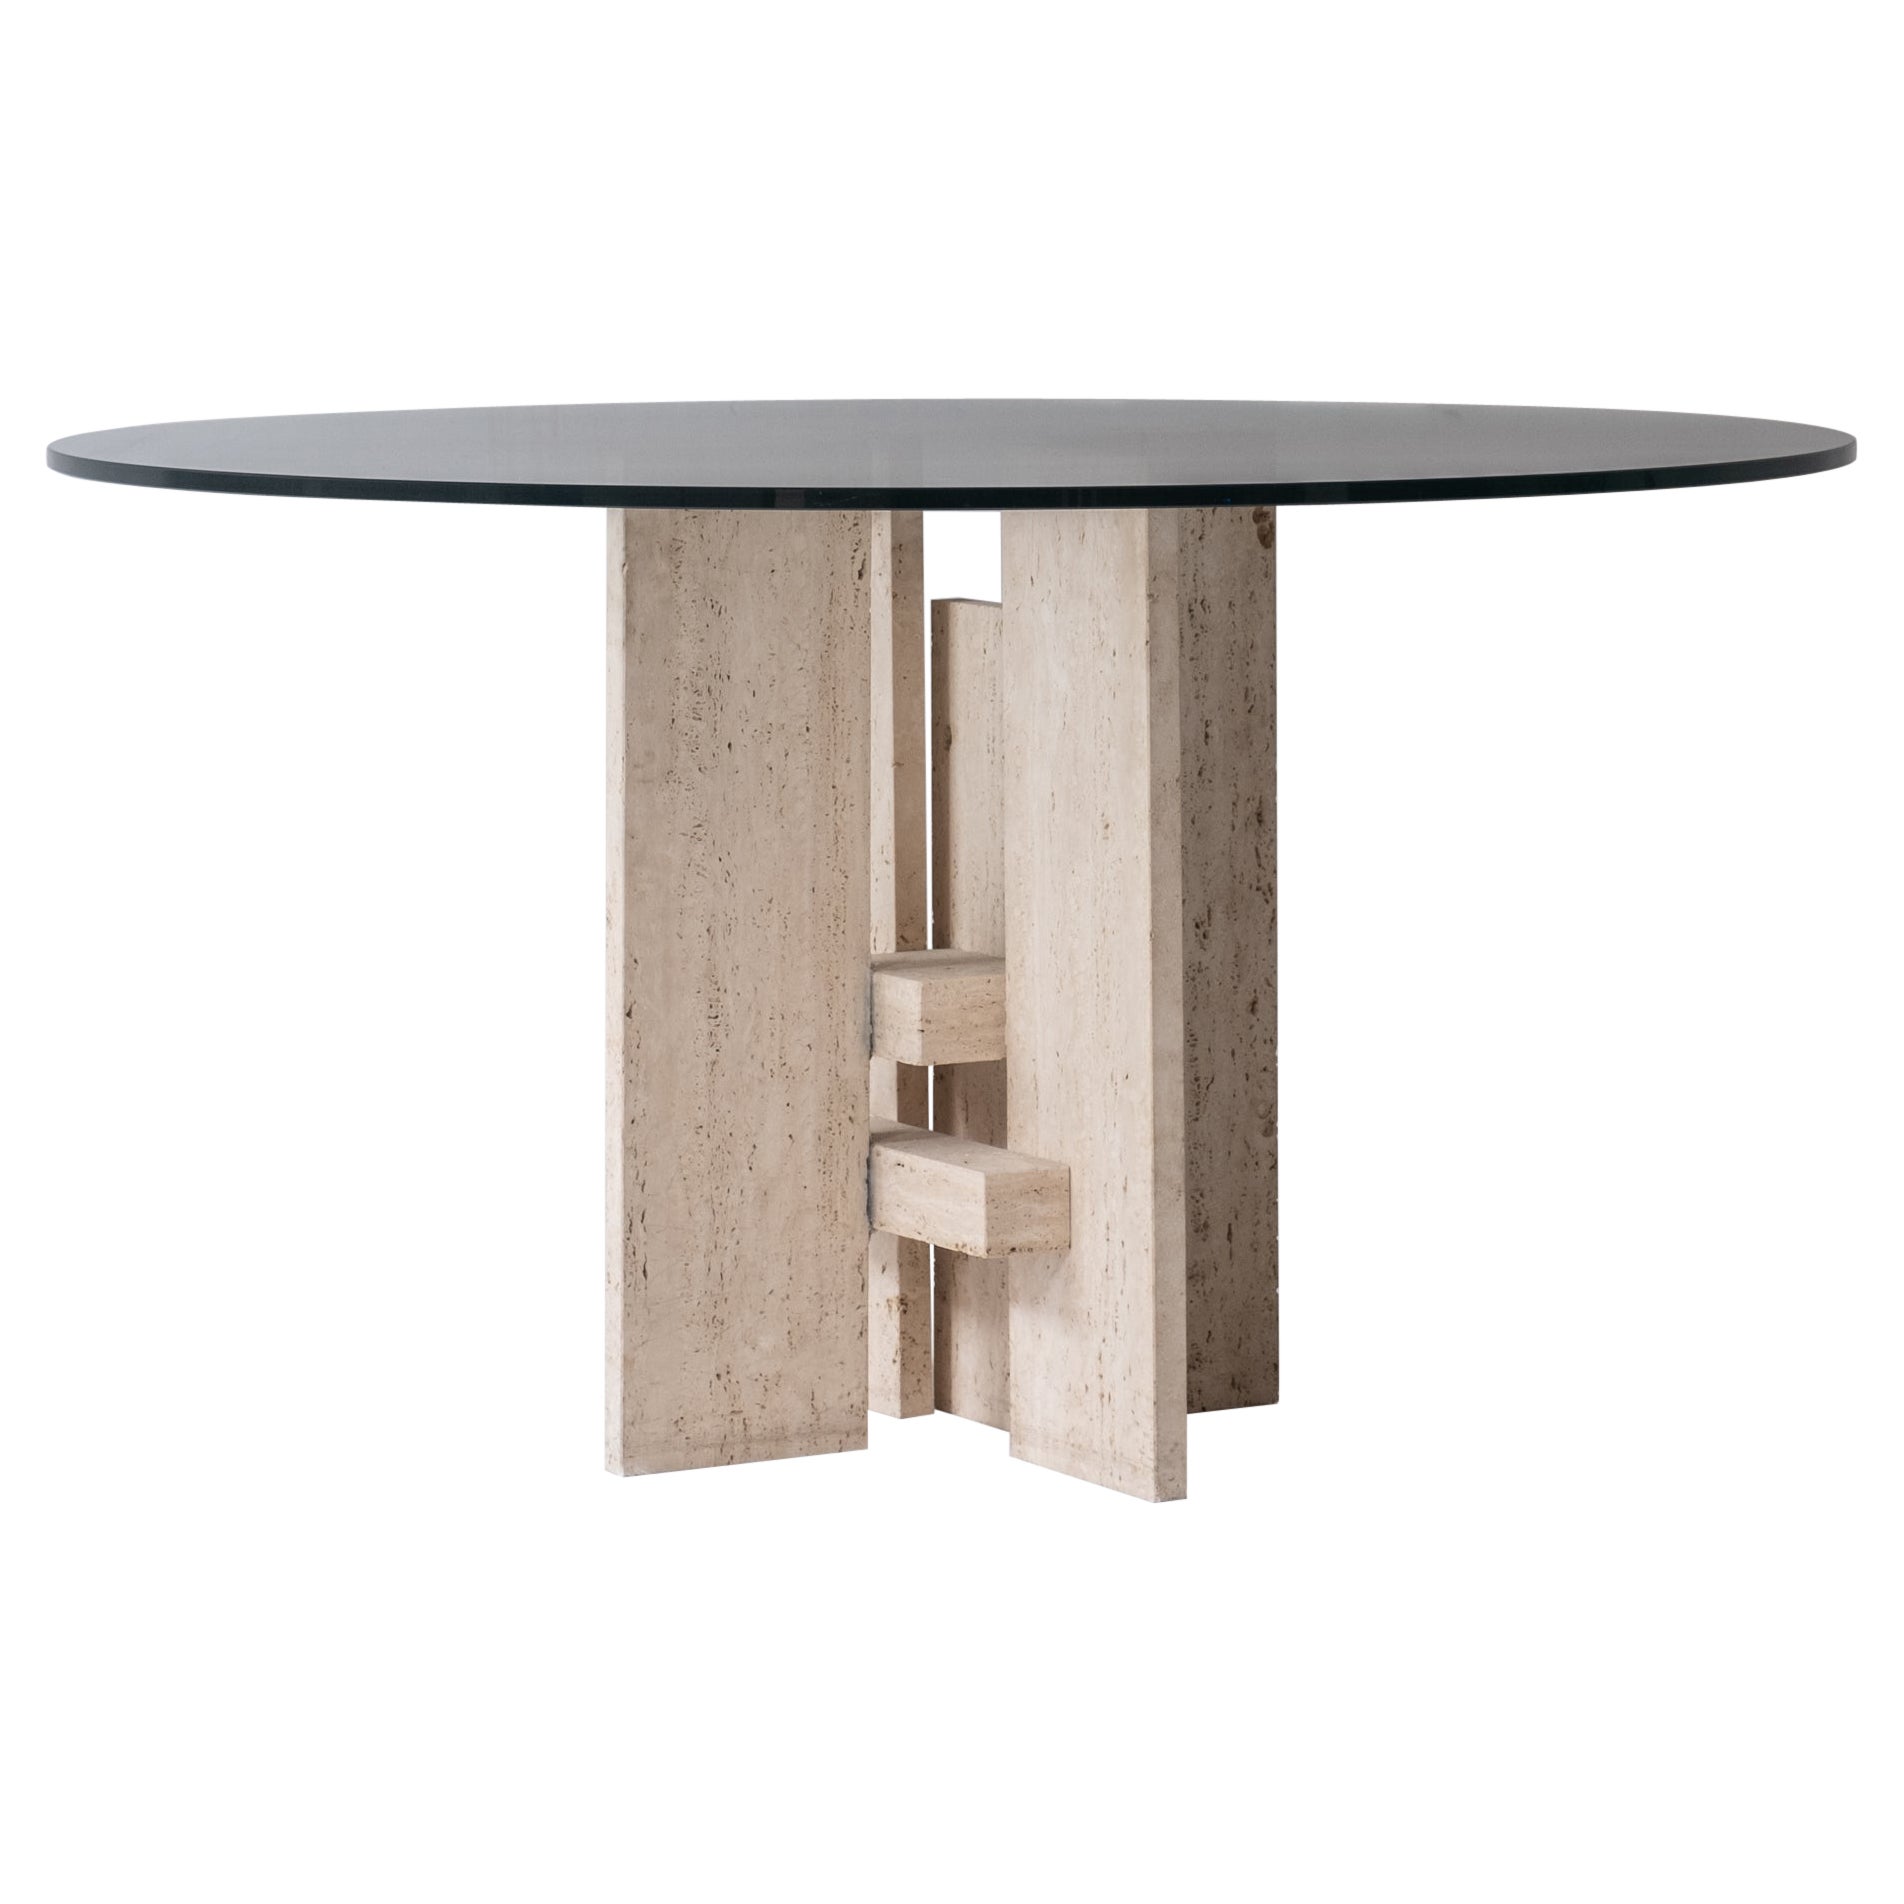 Travertine table with sculptural base designed and manufactured in the 1970s. For Sale